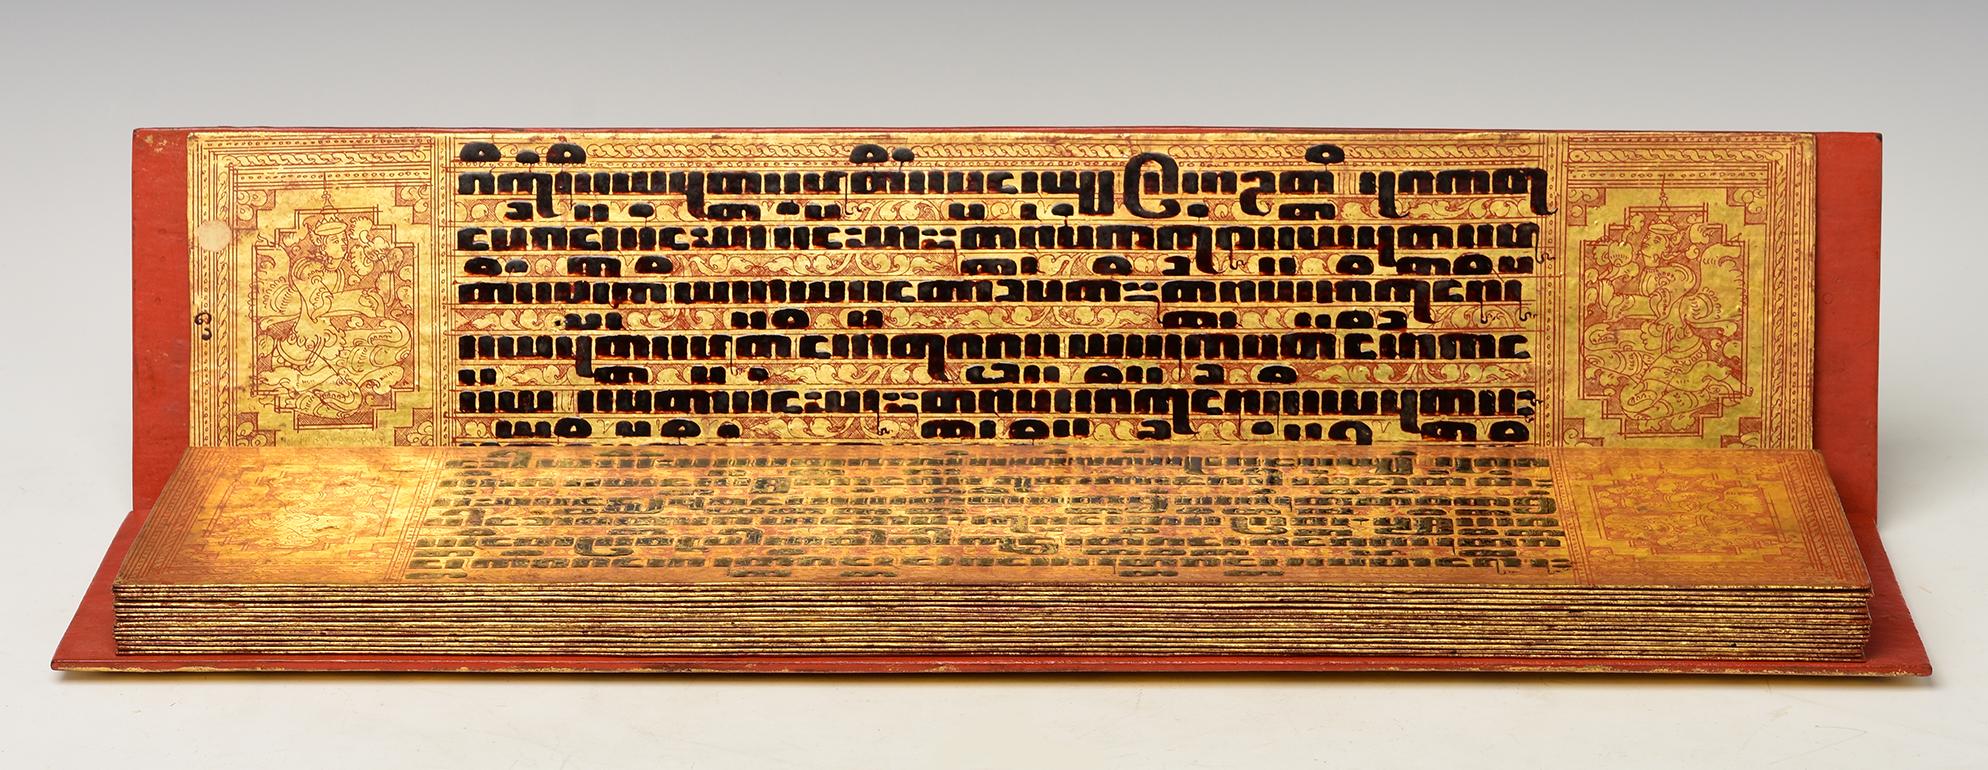 A set of rare and complete Burmese manuscript (KAMMAVACA) made from thick cloth coated with gold and lacquer in nice condition. It was written in the Pali language using Burmese script. The square letters were written in thick and black cinnabar